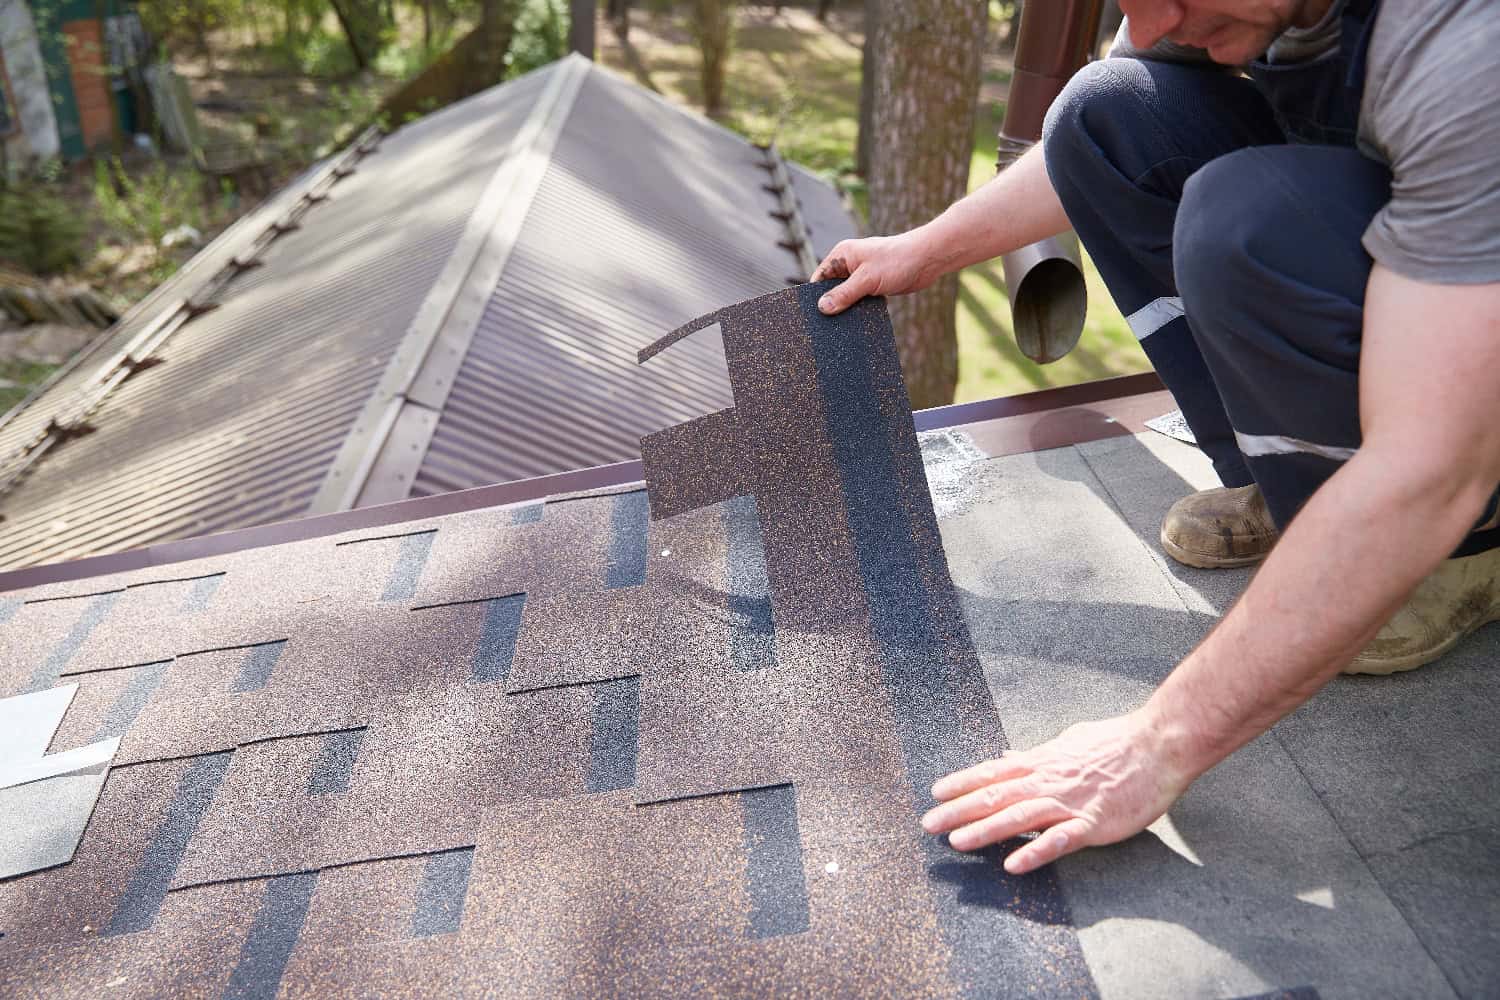 A worker demonstrating how to install architectural shingles